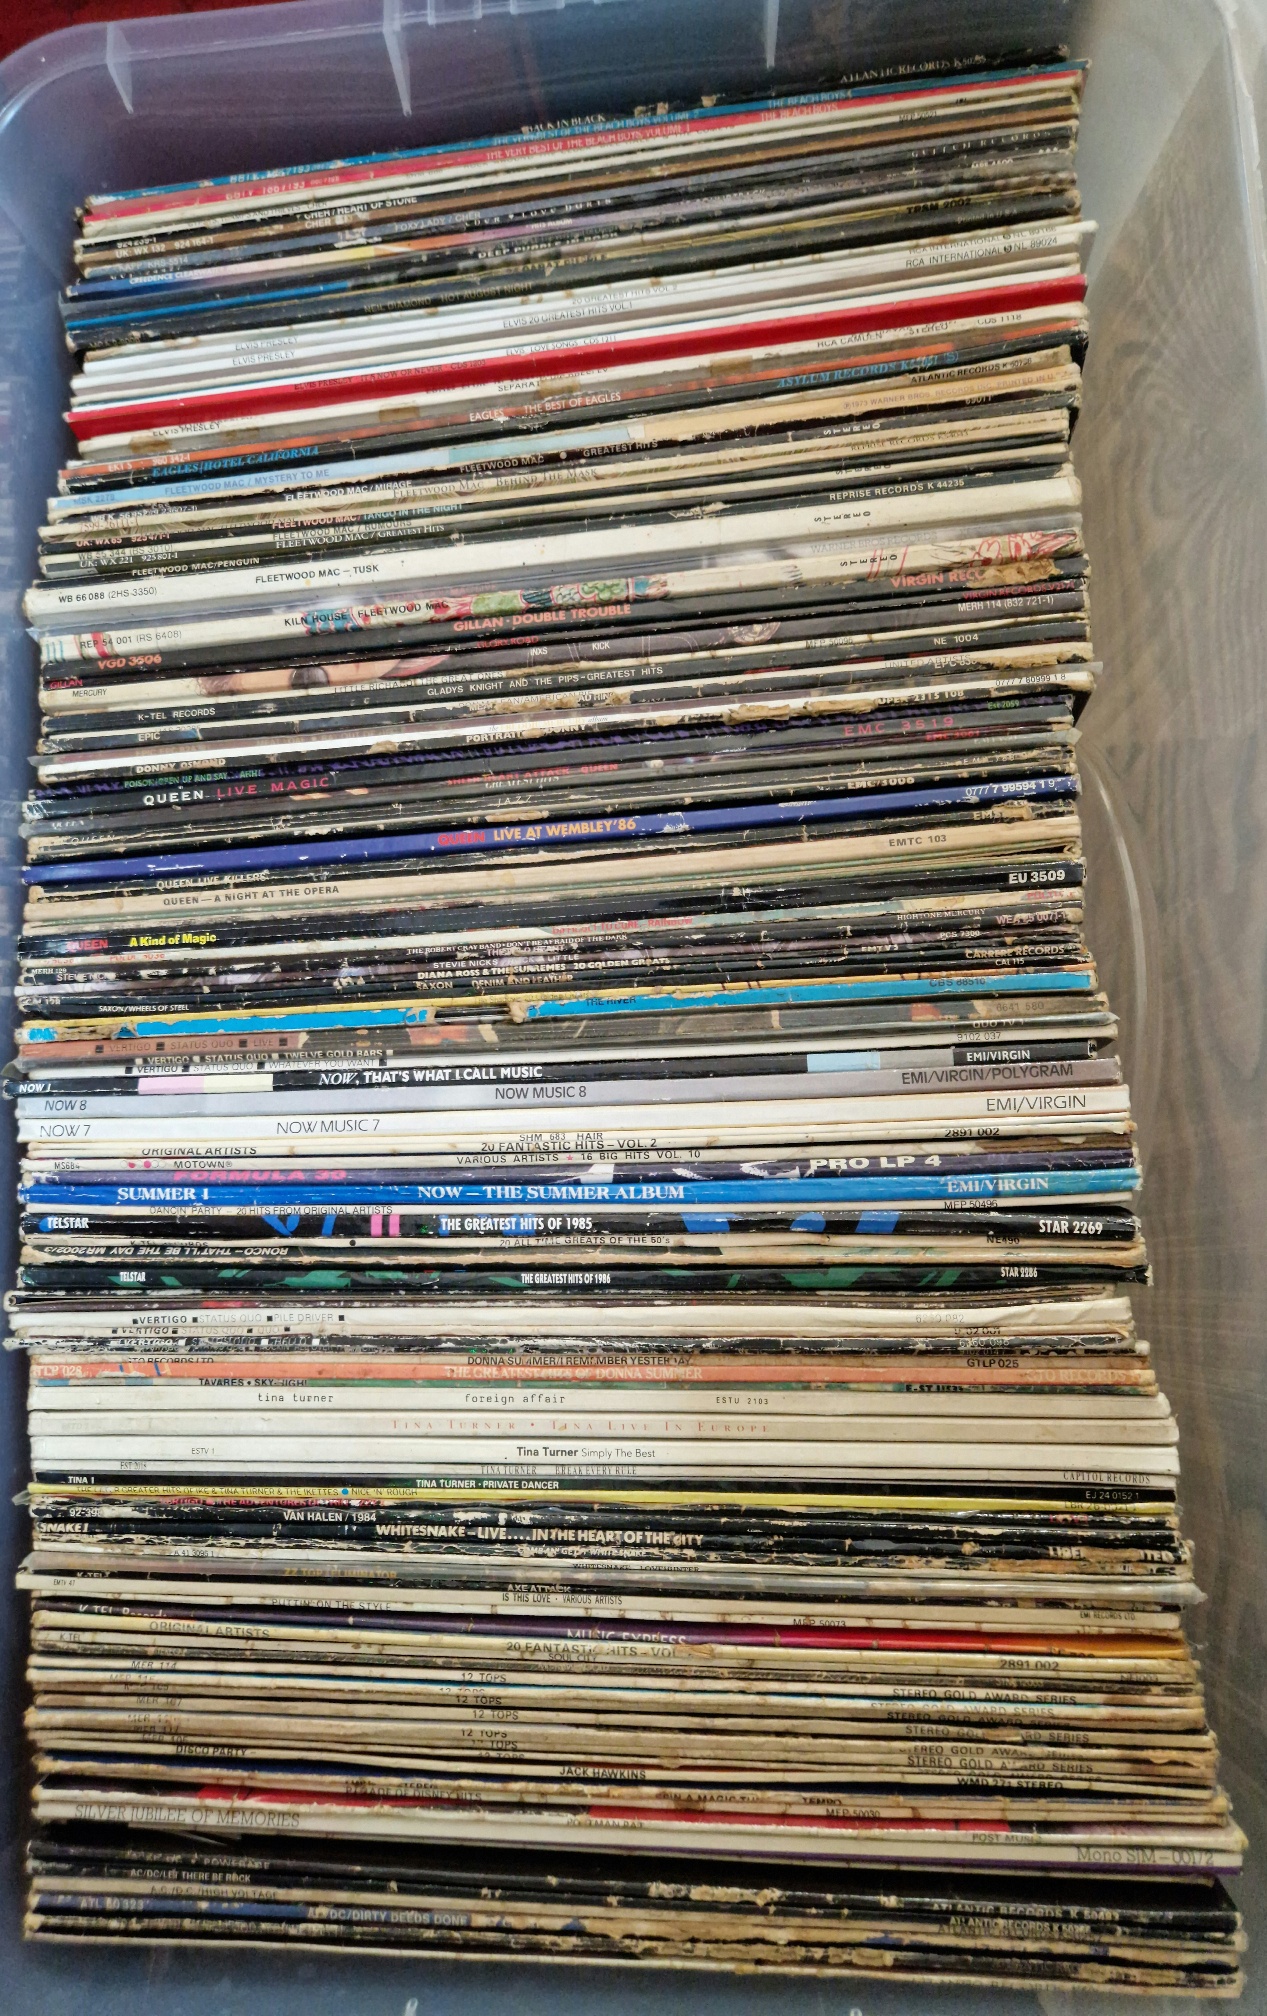 A collection of LPs, various genre, rock and pop including AC/DC. - Image 2 of 2